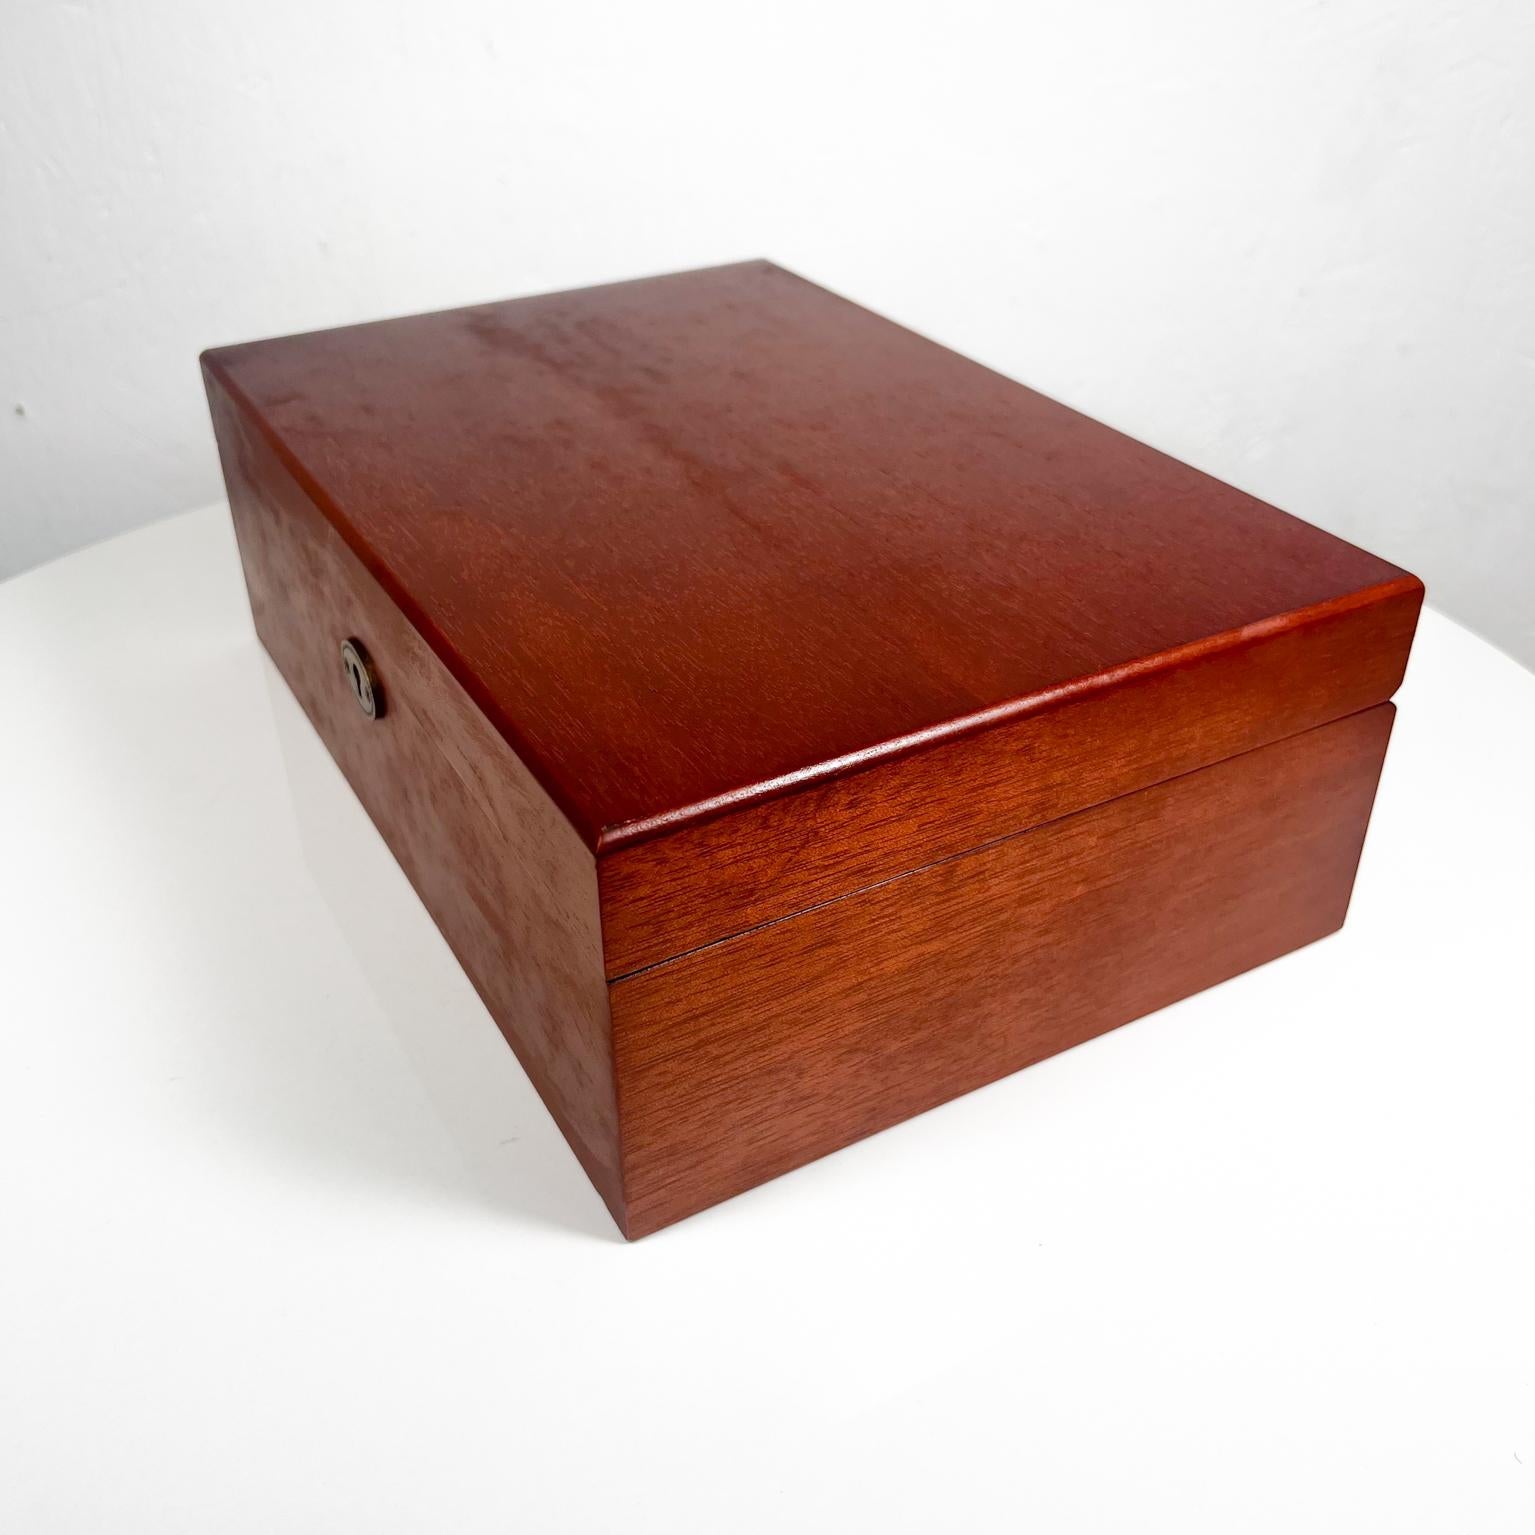 1950s Modern Wood Jewelry Box Felt Sectioned Interior Compartments 6